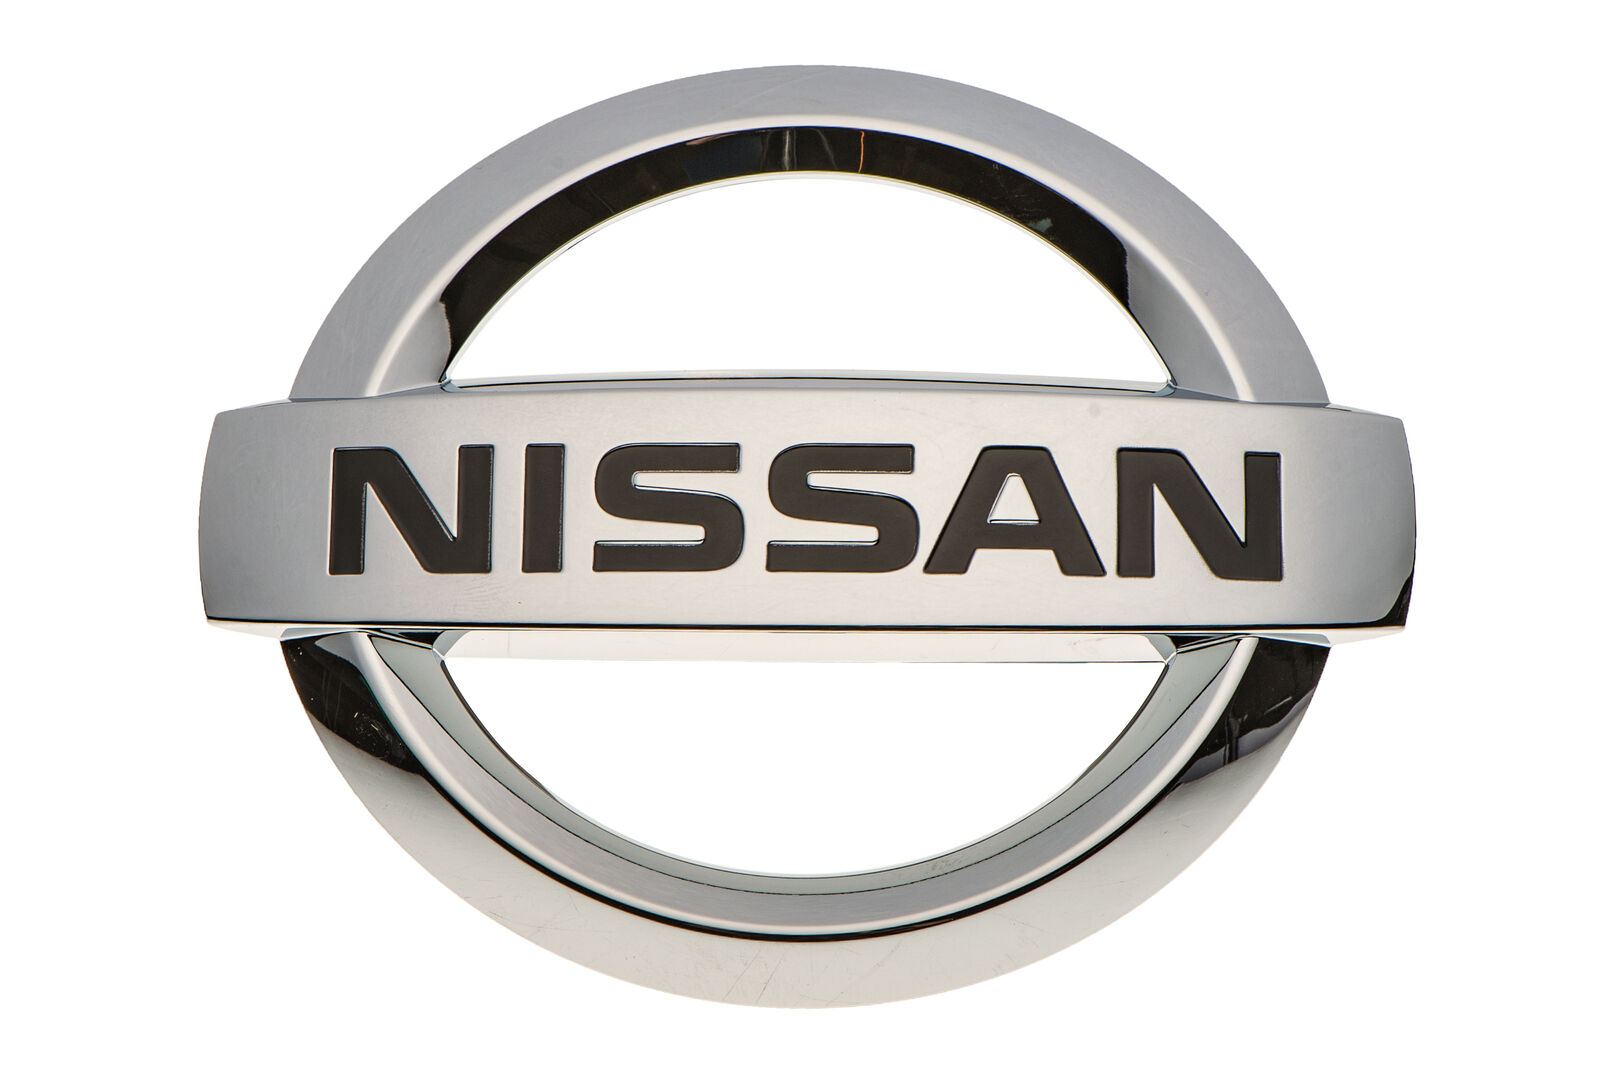 2007-2012 Nissan Altima Front Radiator Grill Grille Chrome Emblem Decal OEM NEW